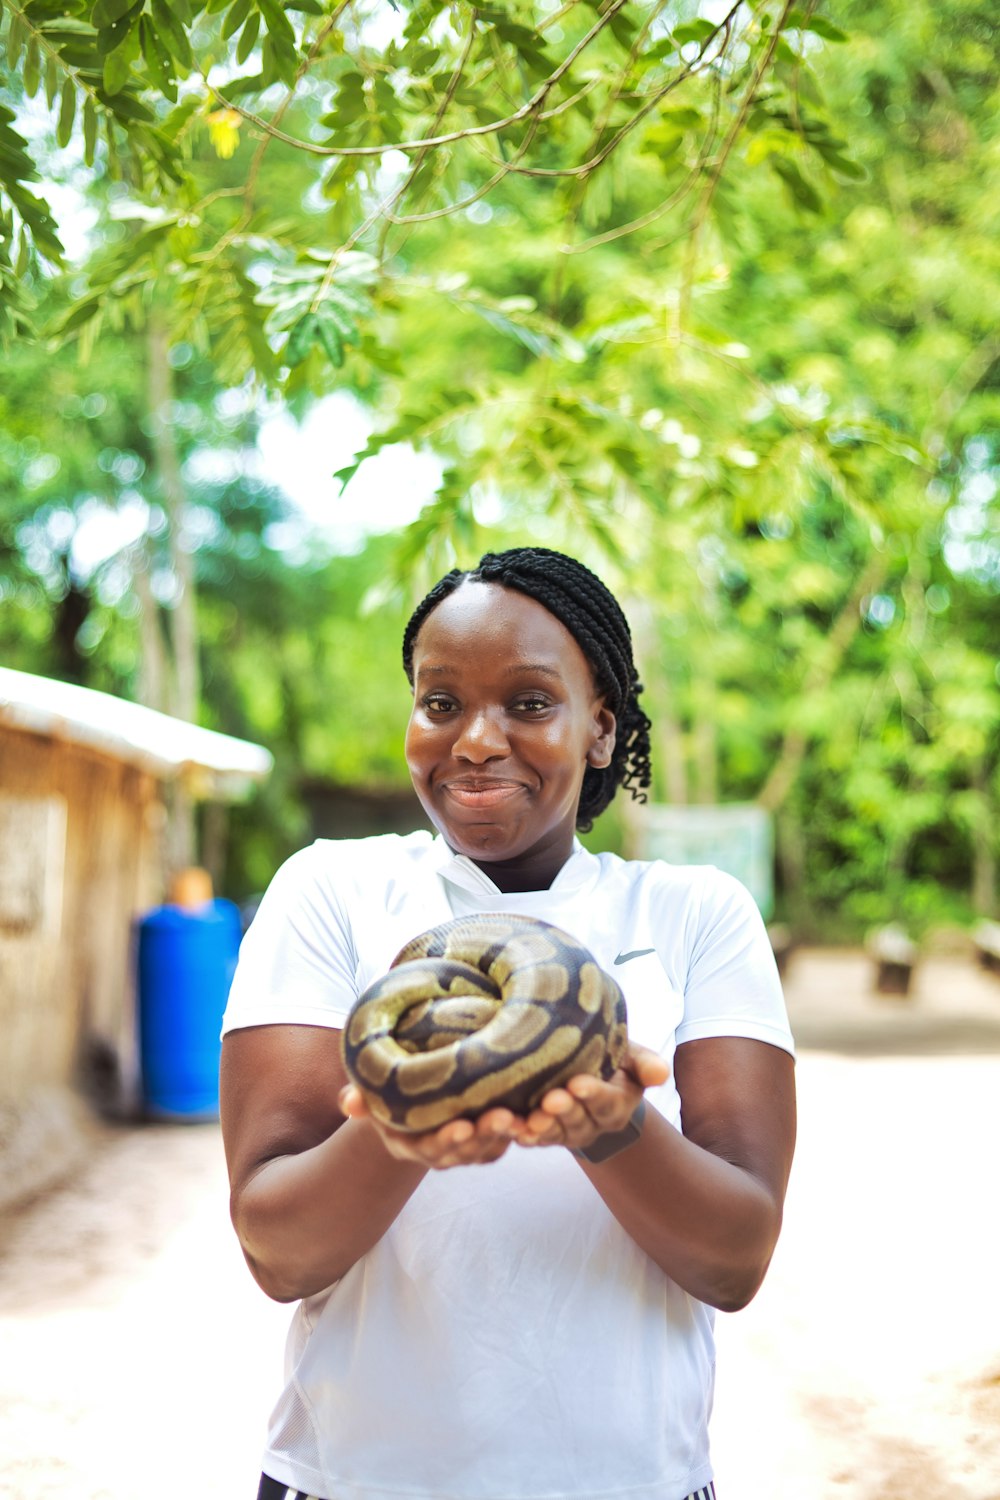 a woman holding a large snake in her hands